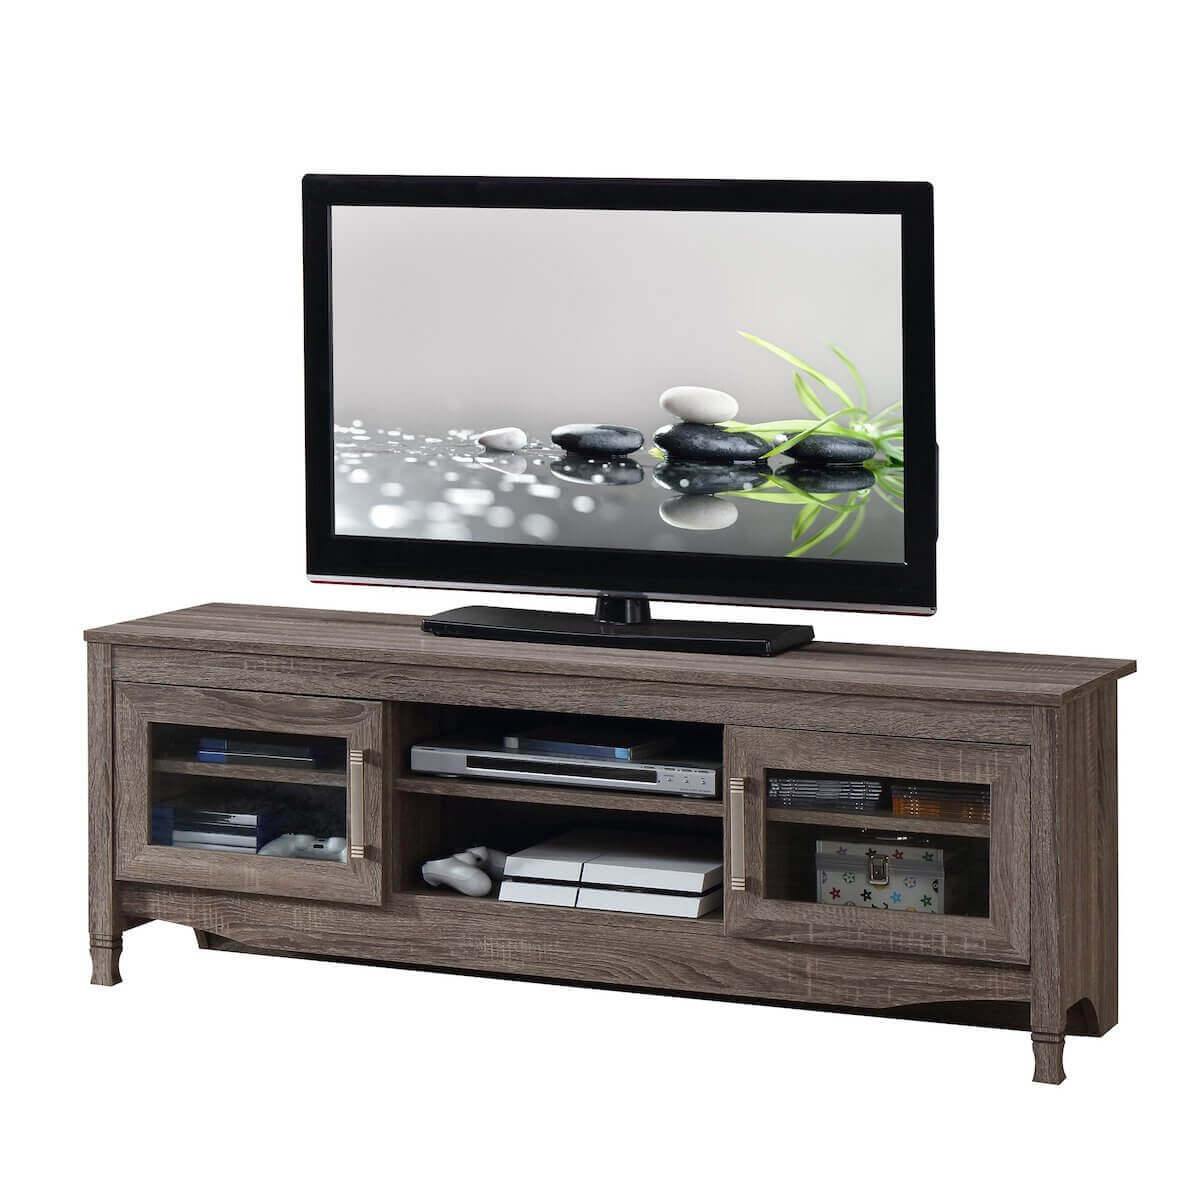 Techni Mobili Gray Driftwood TV Stand RTA-8855-GRY with TV